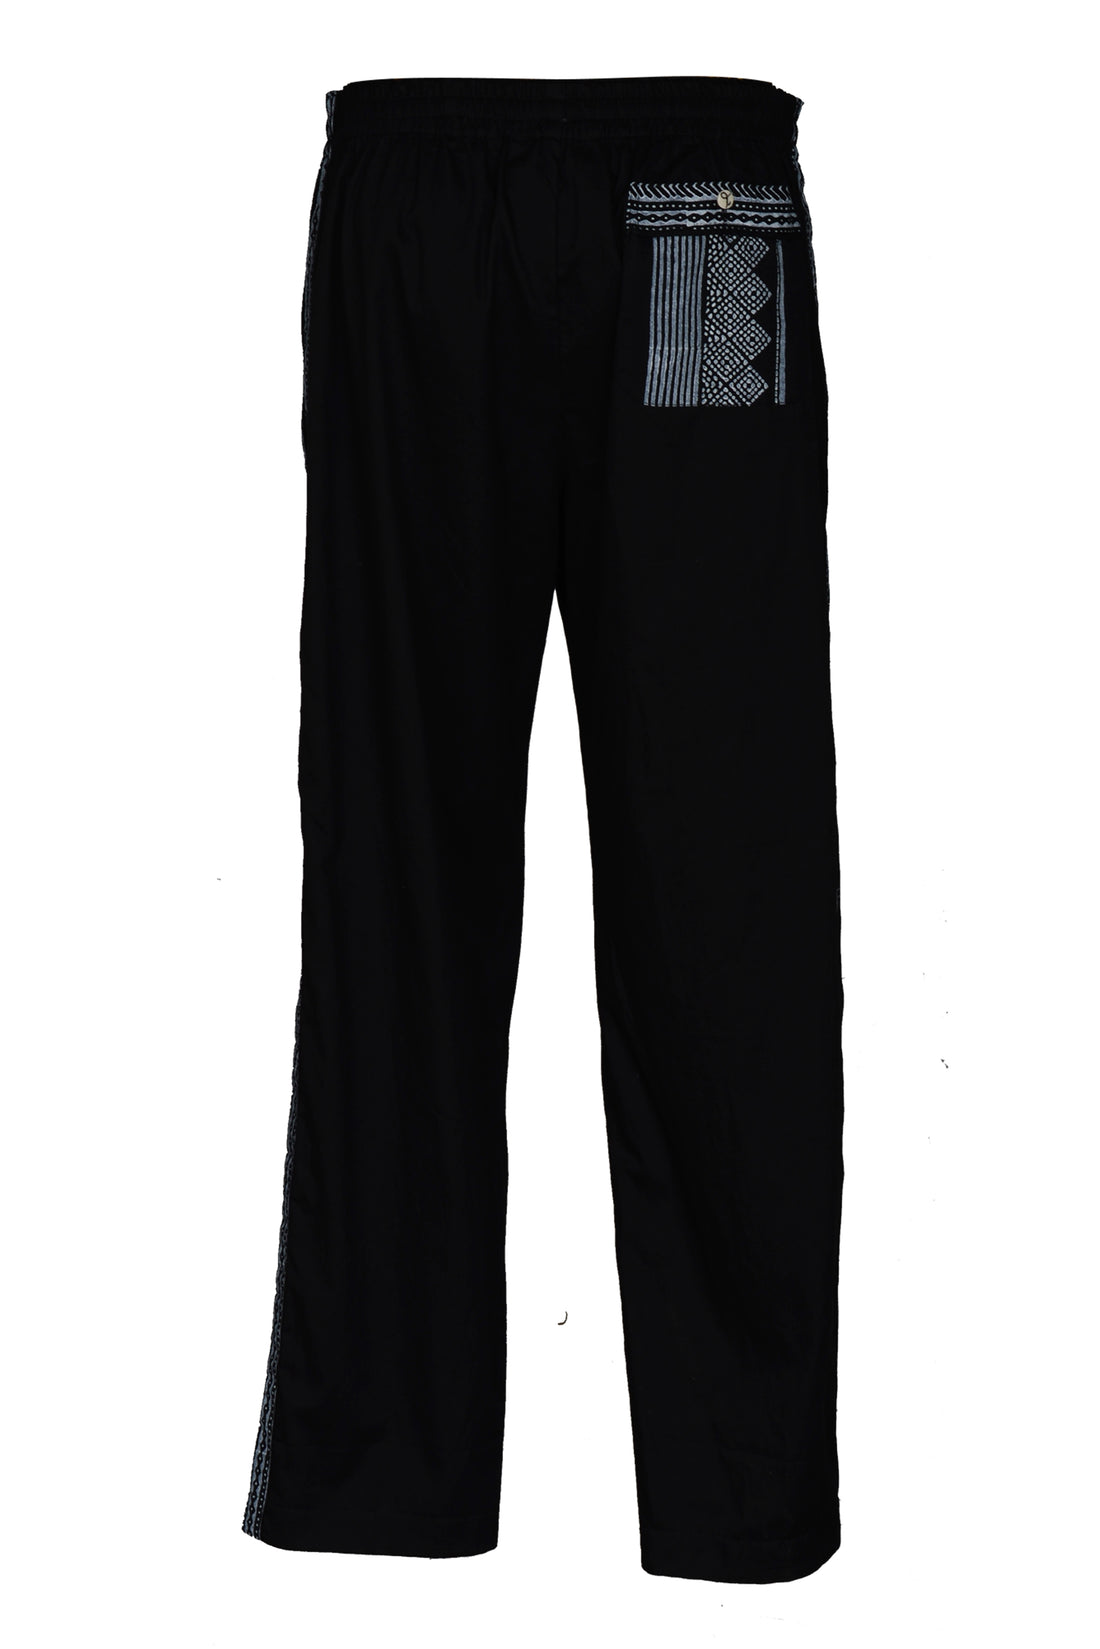 Lio Pants - Cotton Twill Carved Wood Block Print with Hand Carved Bone Buttons (7305853239492)